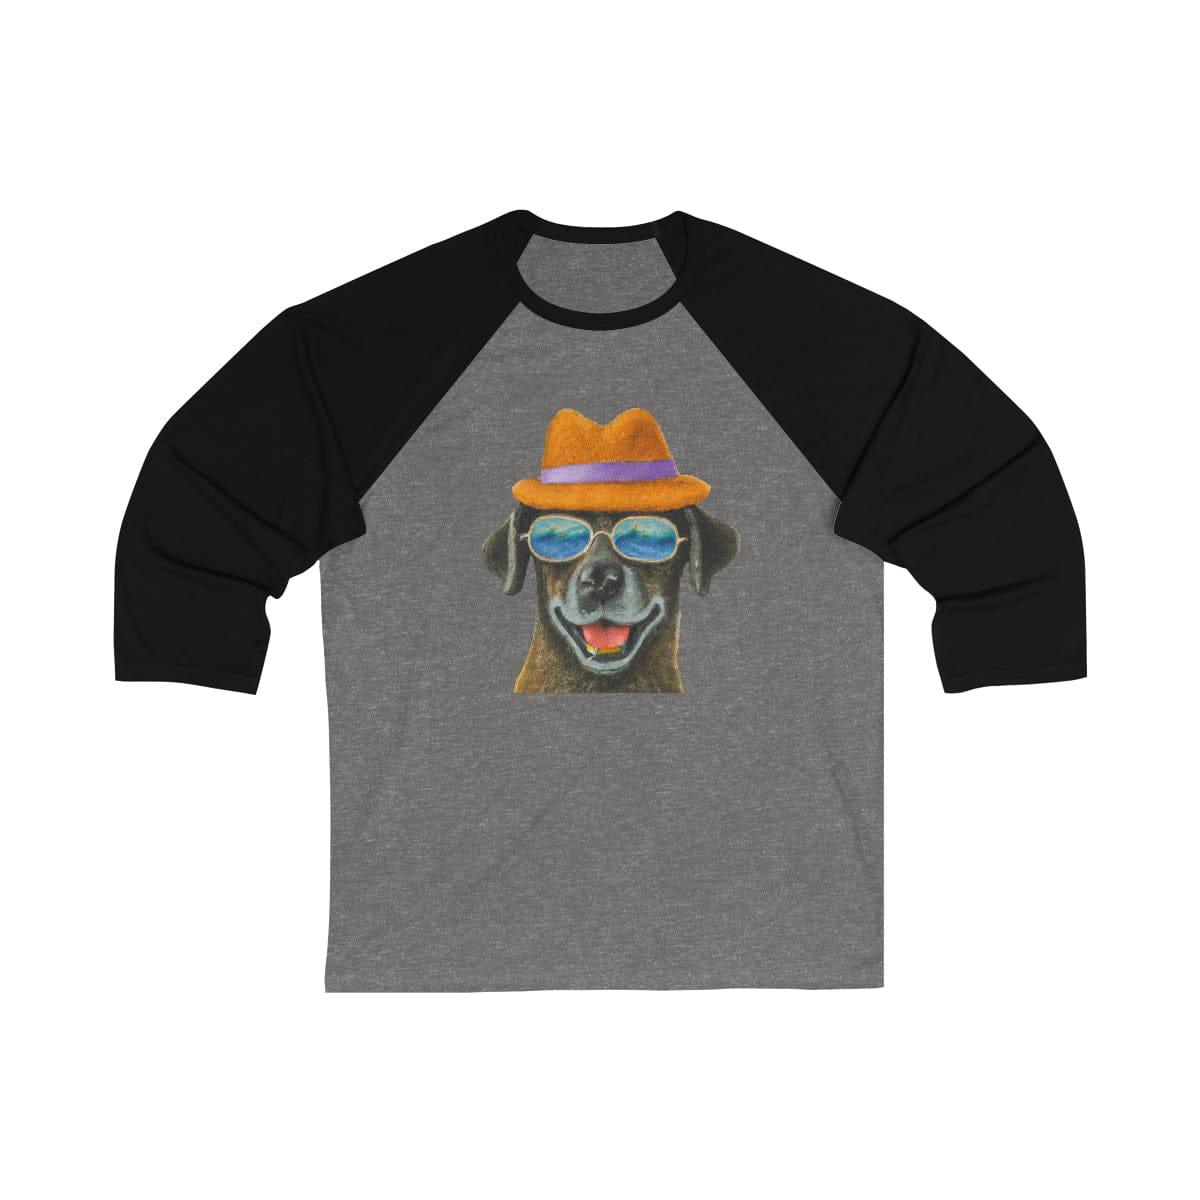 Dog at the beach wearing a hat and sunglasses arts unisex 3\4 Sleeve Baseball Tee for women - Giftsmojo